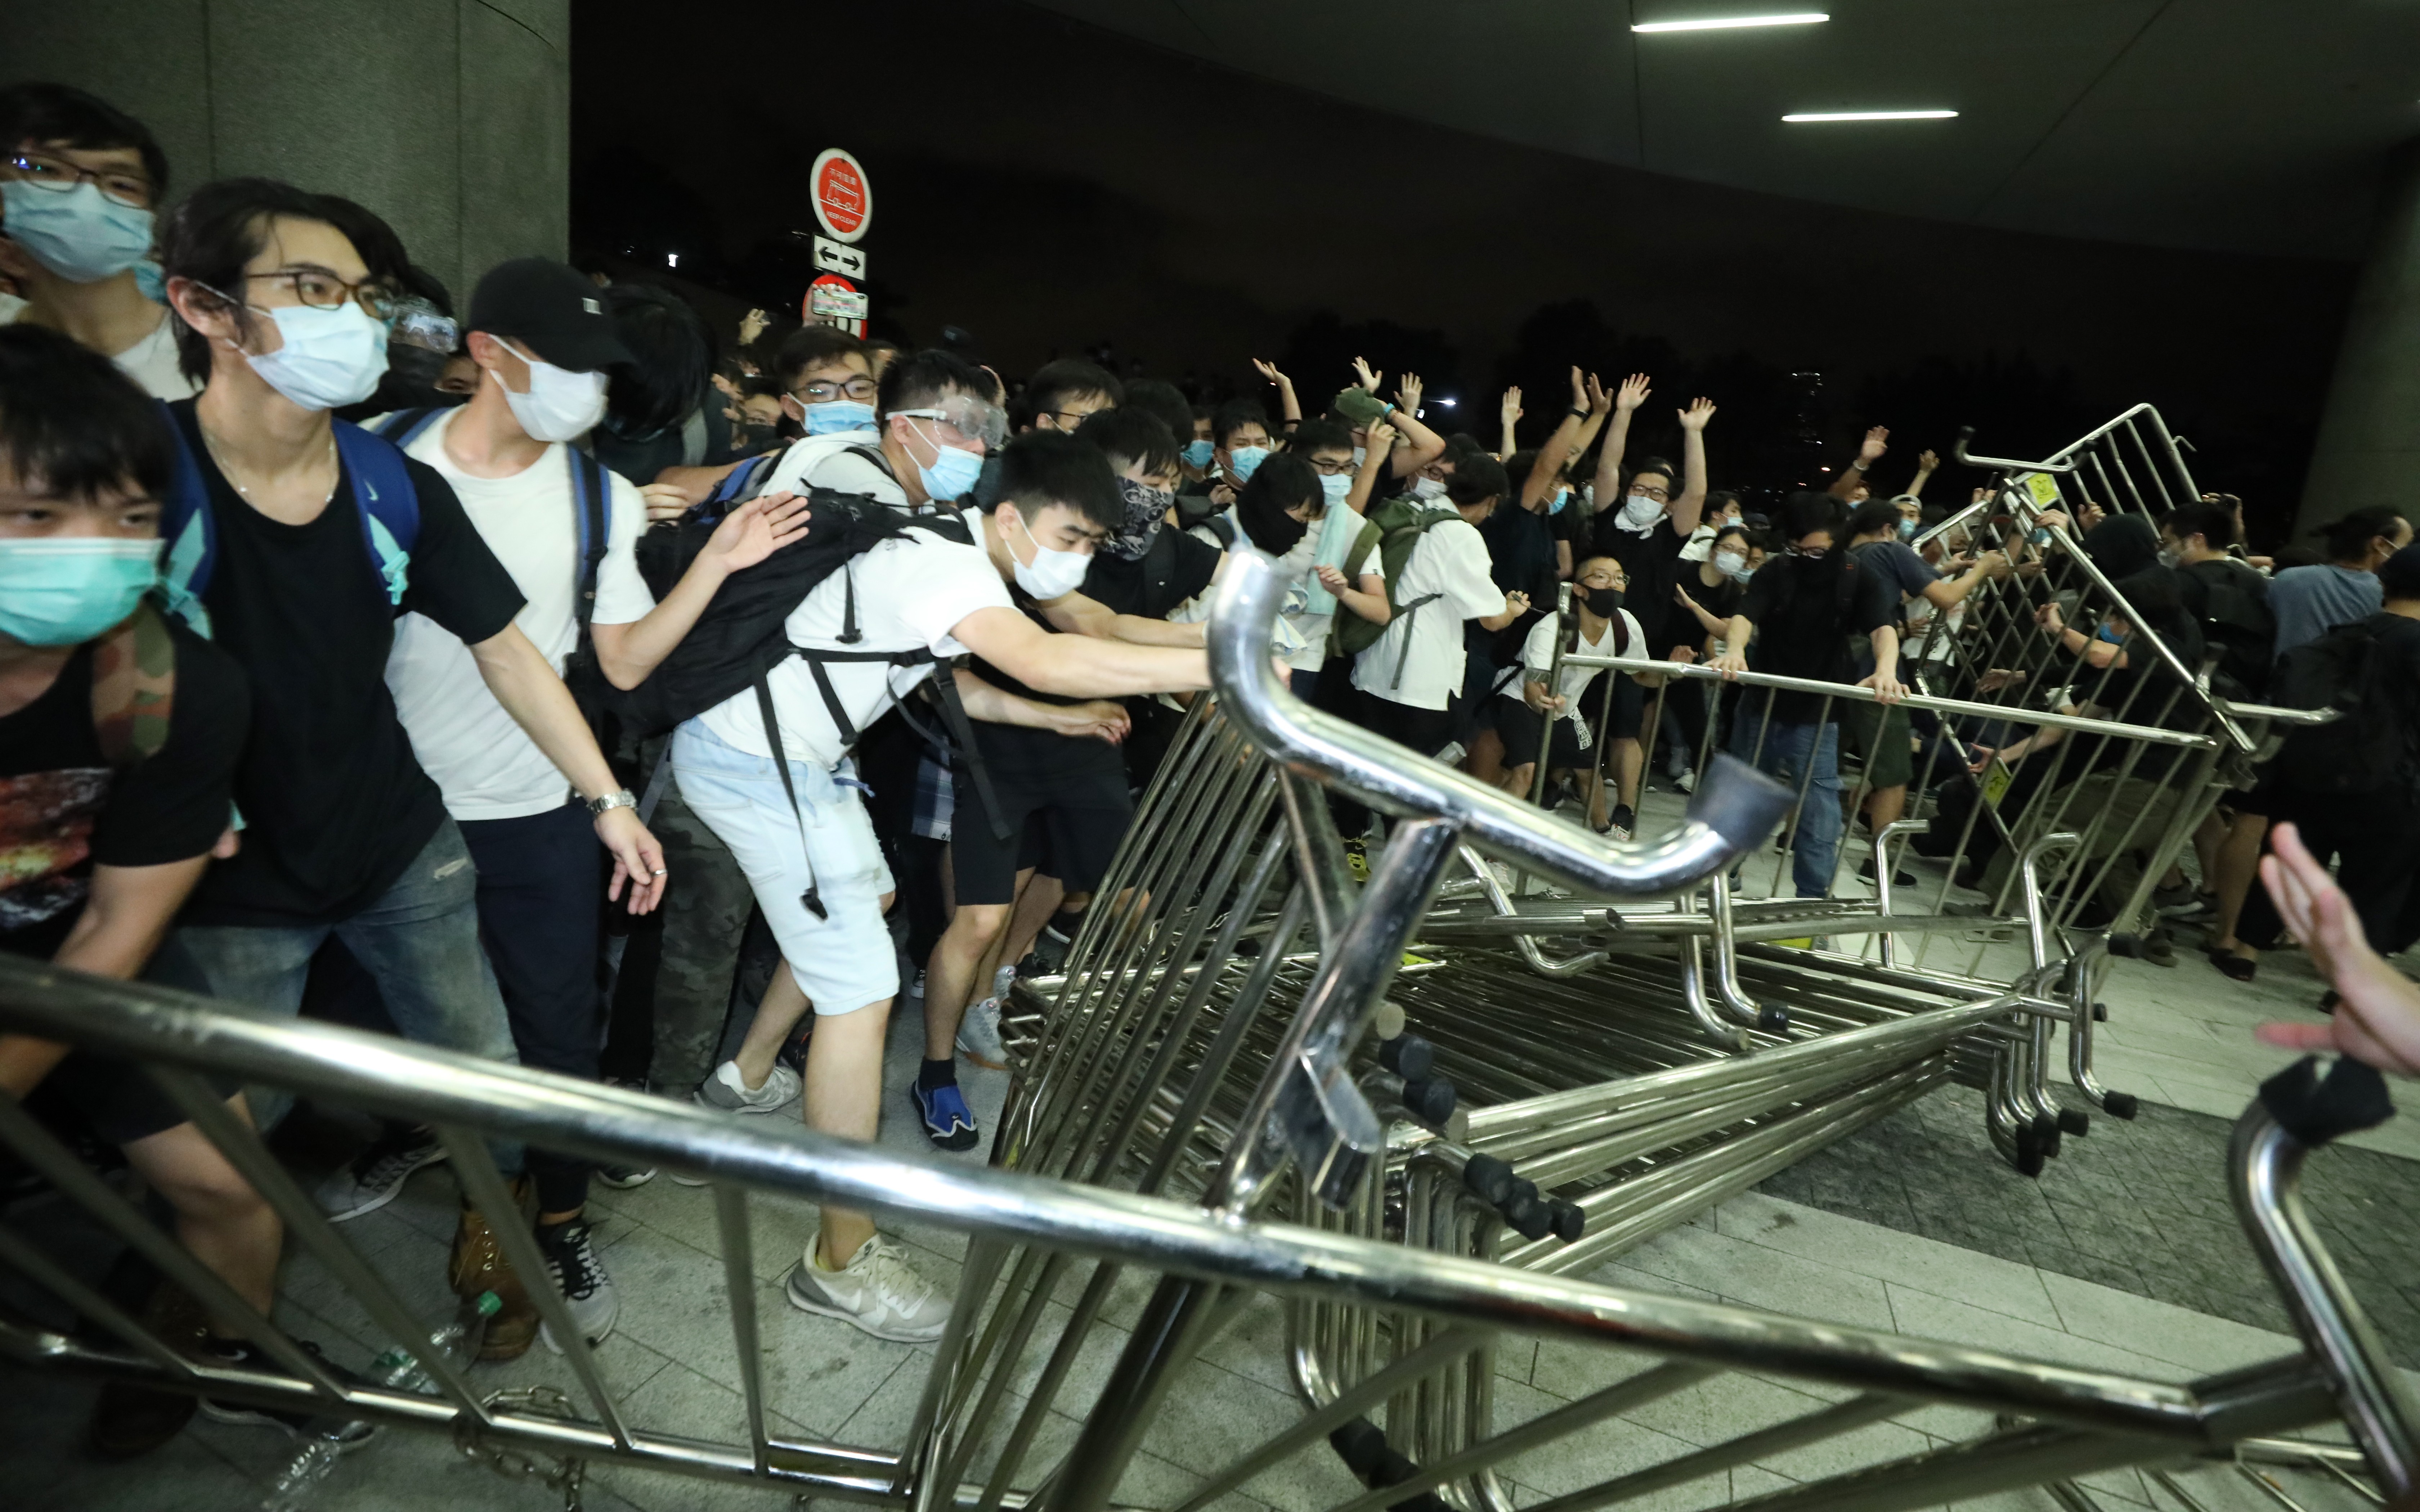 Demonstrators clash with riot police during a protest to demand authorities scrap a proposed extradition bill with China, outside the Legislative Council in Admiralty. The protest against the extradition bill escalated overnight after the previous day’s peaceful march. Photo: Dickson Lee